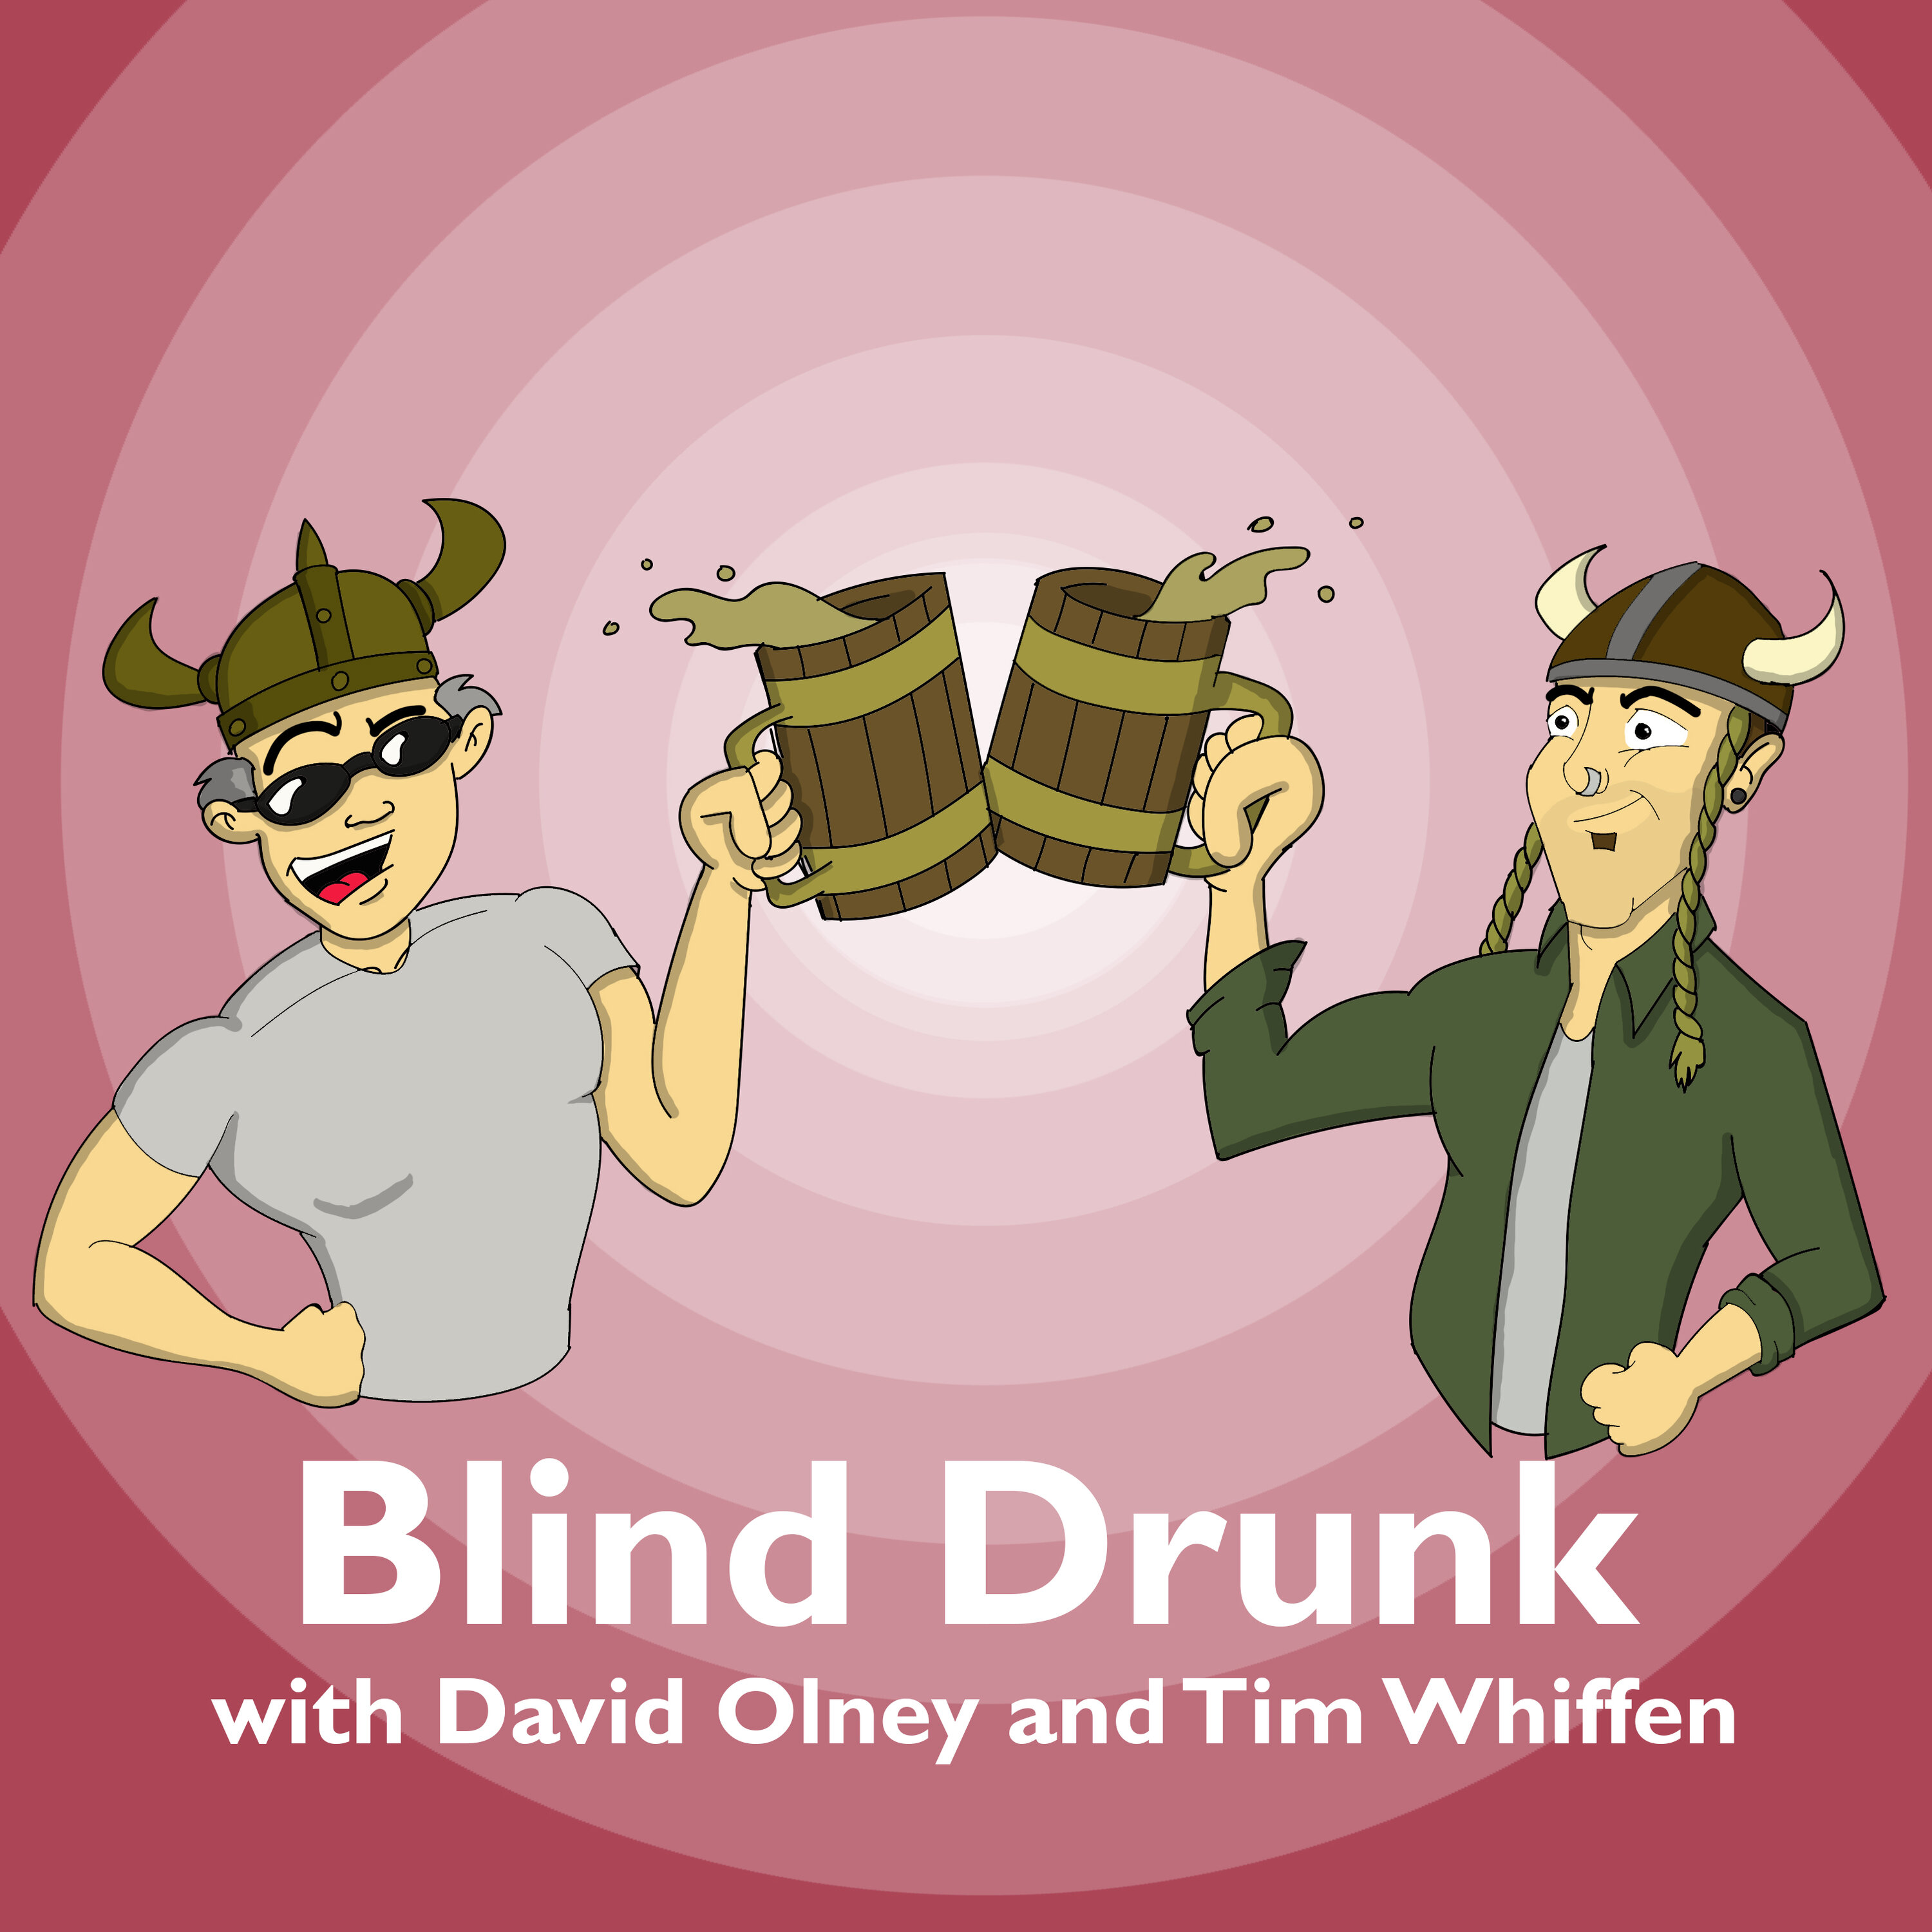 Blind Drunk - Snails, Sales, and Stouts (With Andy Martin and Liam Carter)